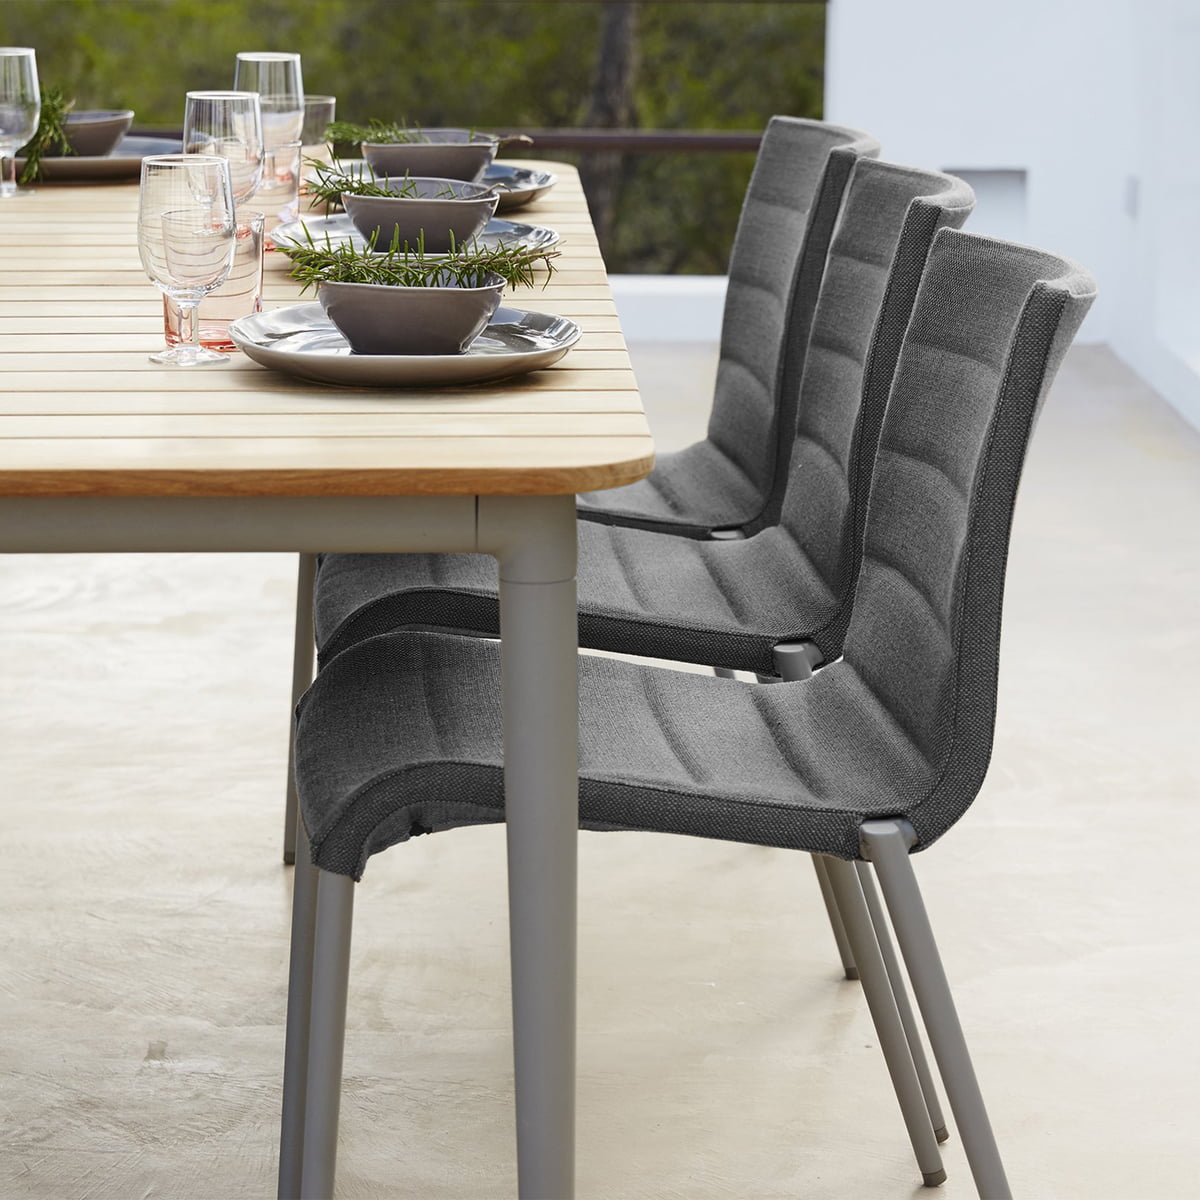 Cane-line - Core Outdoor chair | Connox